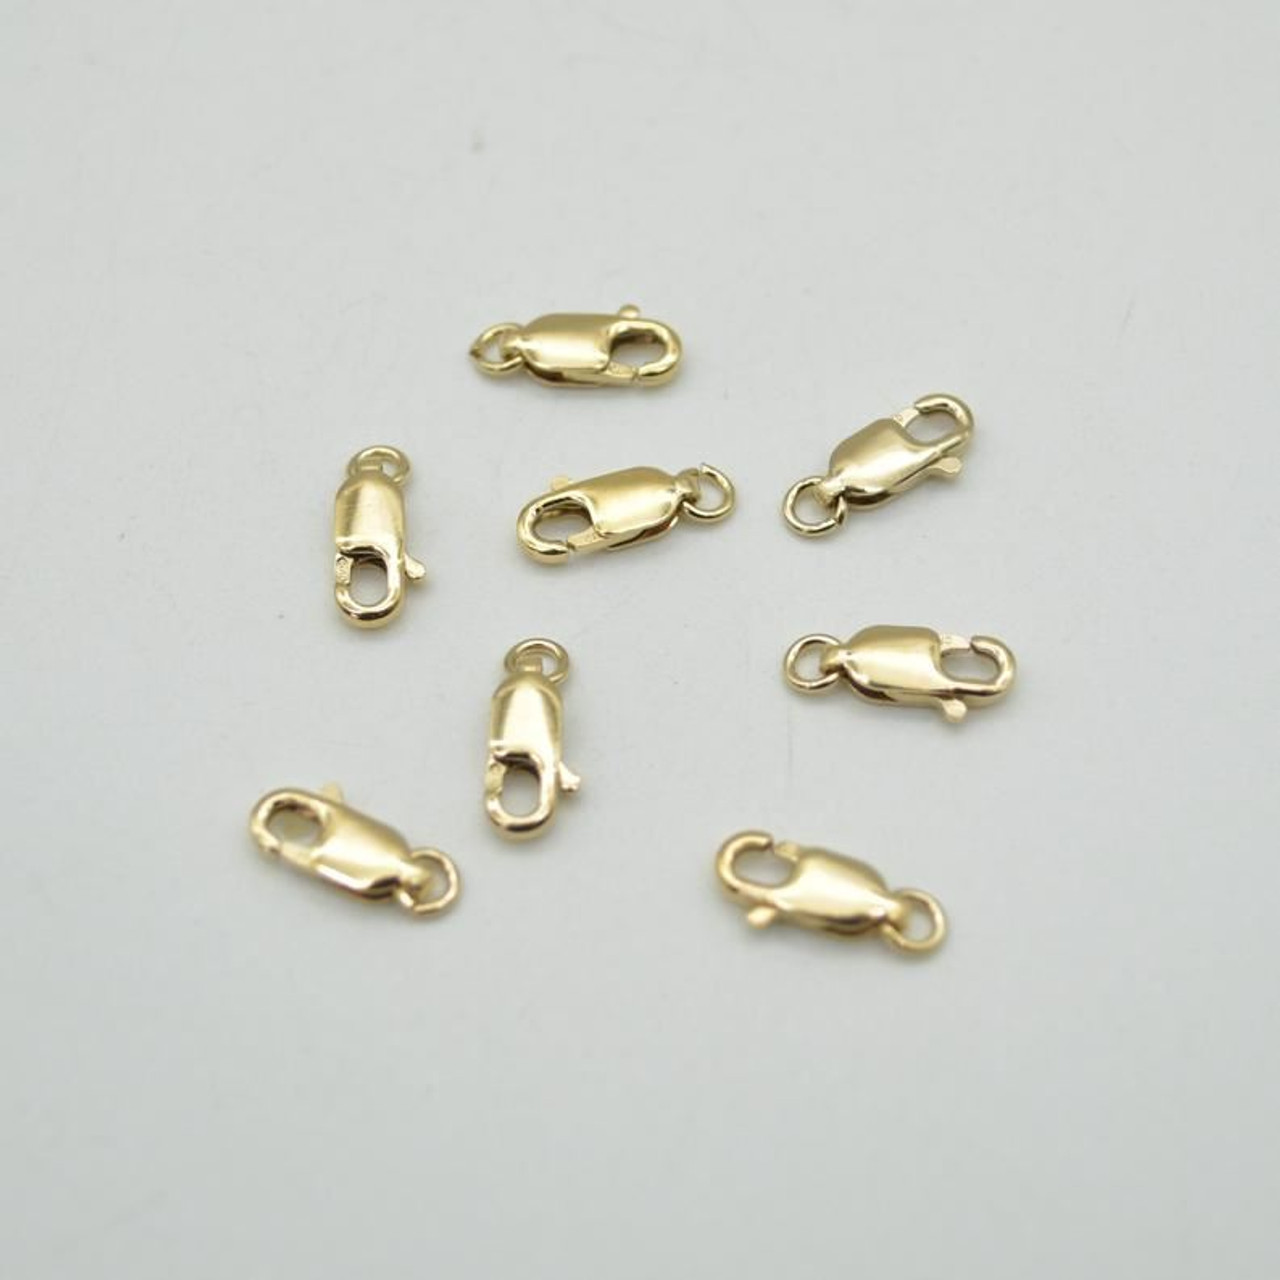 14/20 Yellow Gold-Filled Lobster Clasp with Open Ring